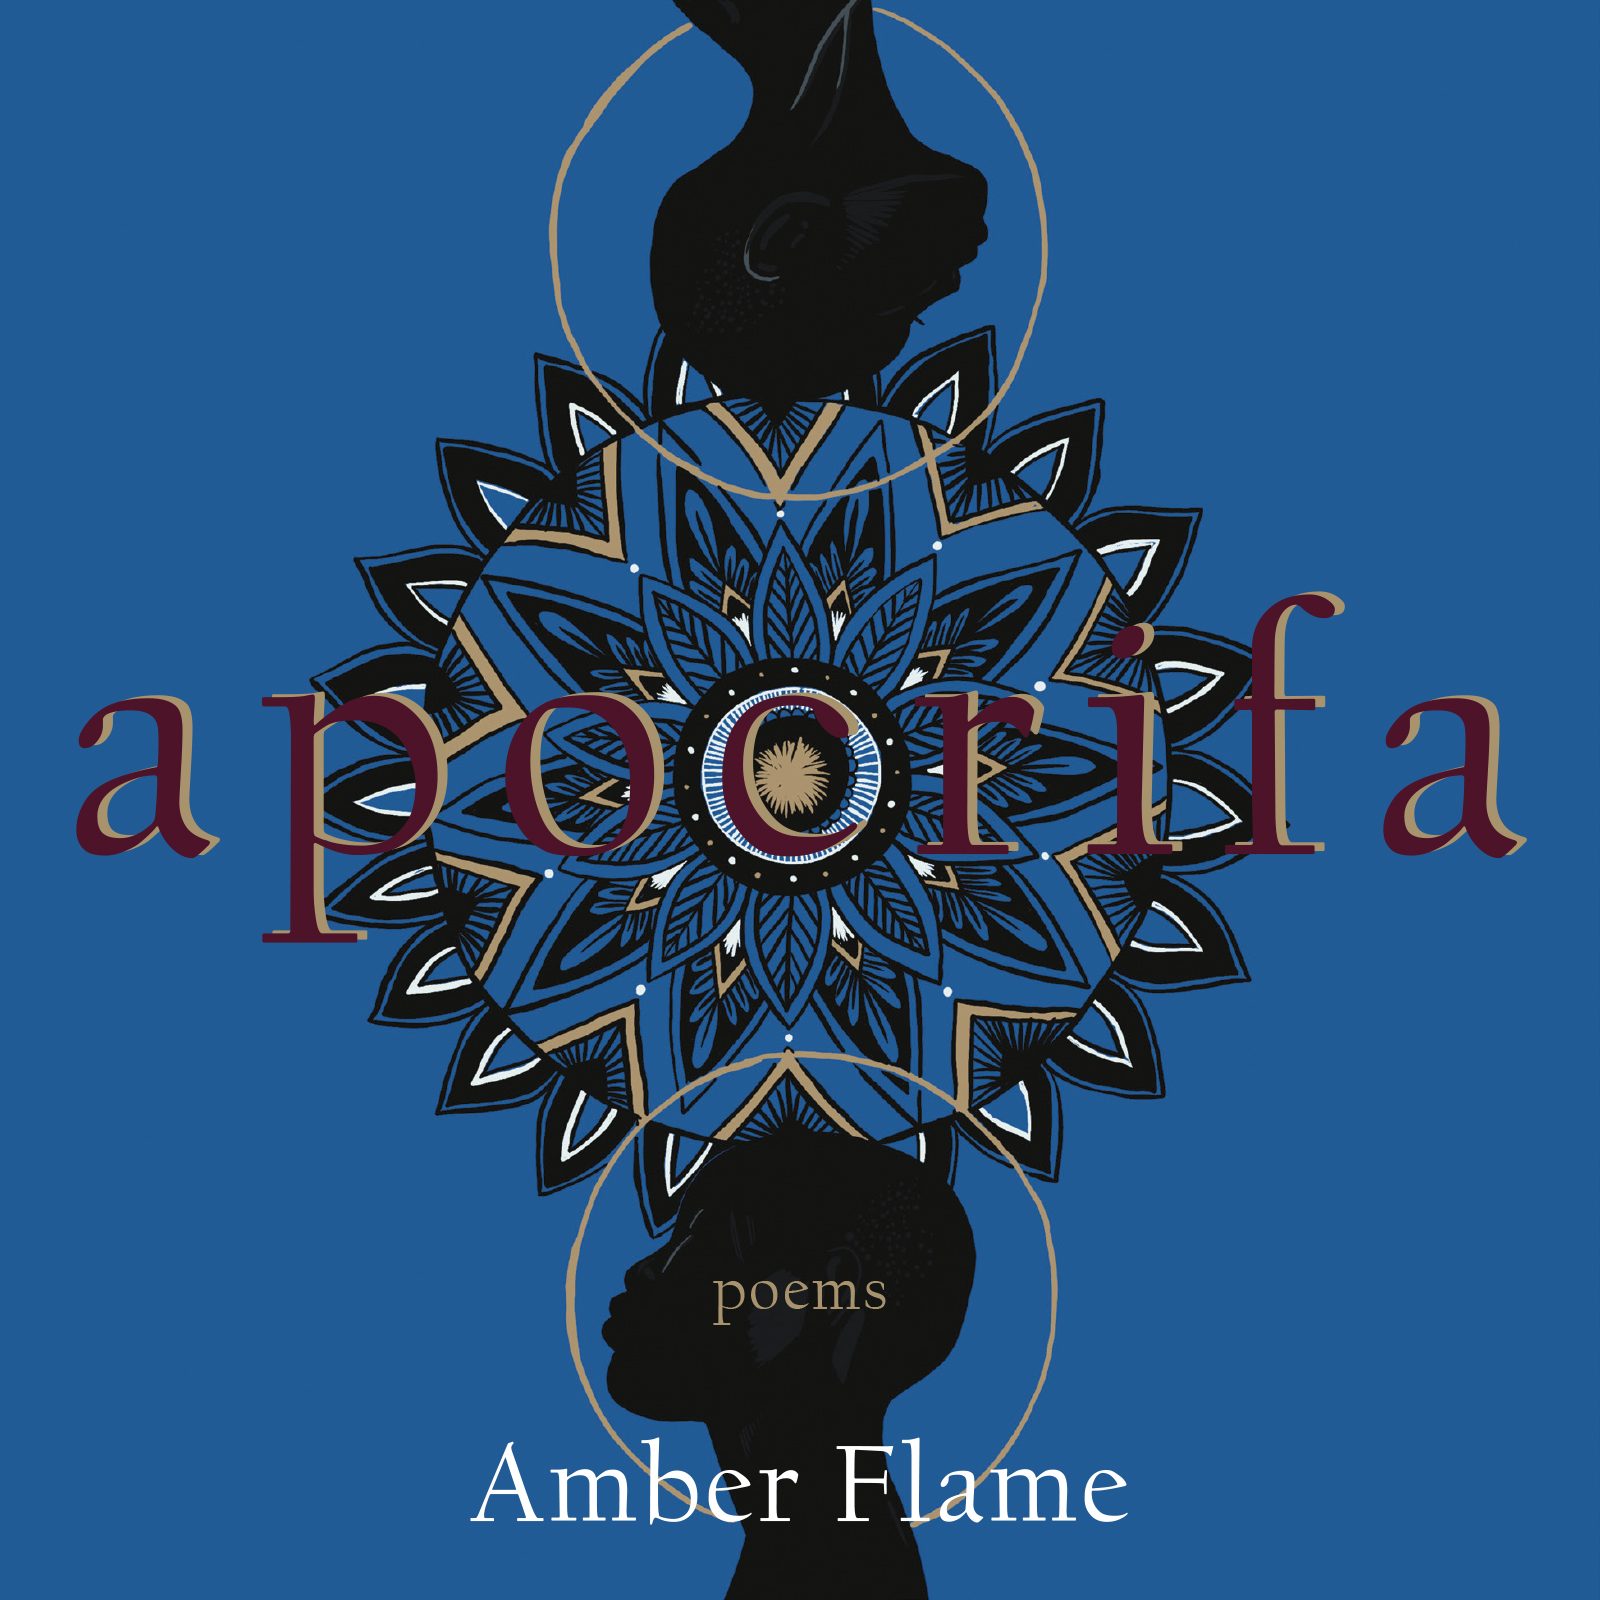 In the center of the blue cover is a circle with a flower inside. Outside the circle are petals. Above and below the circle are black silhouettes of a face. Across the circle is the title, "apocrifa." Below is the text, "poems by Amber Flame."